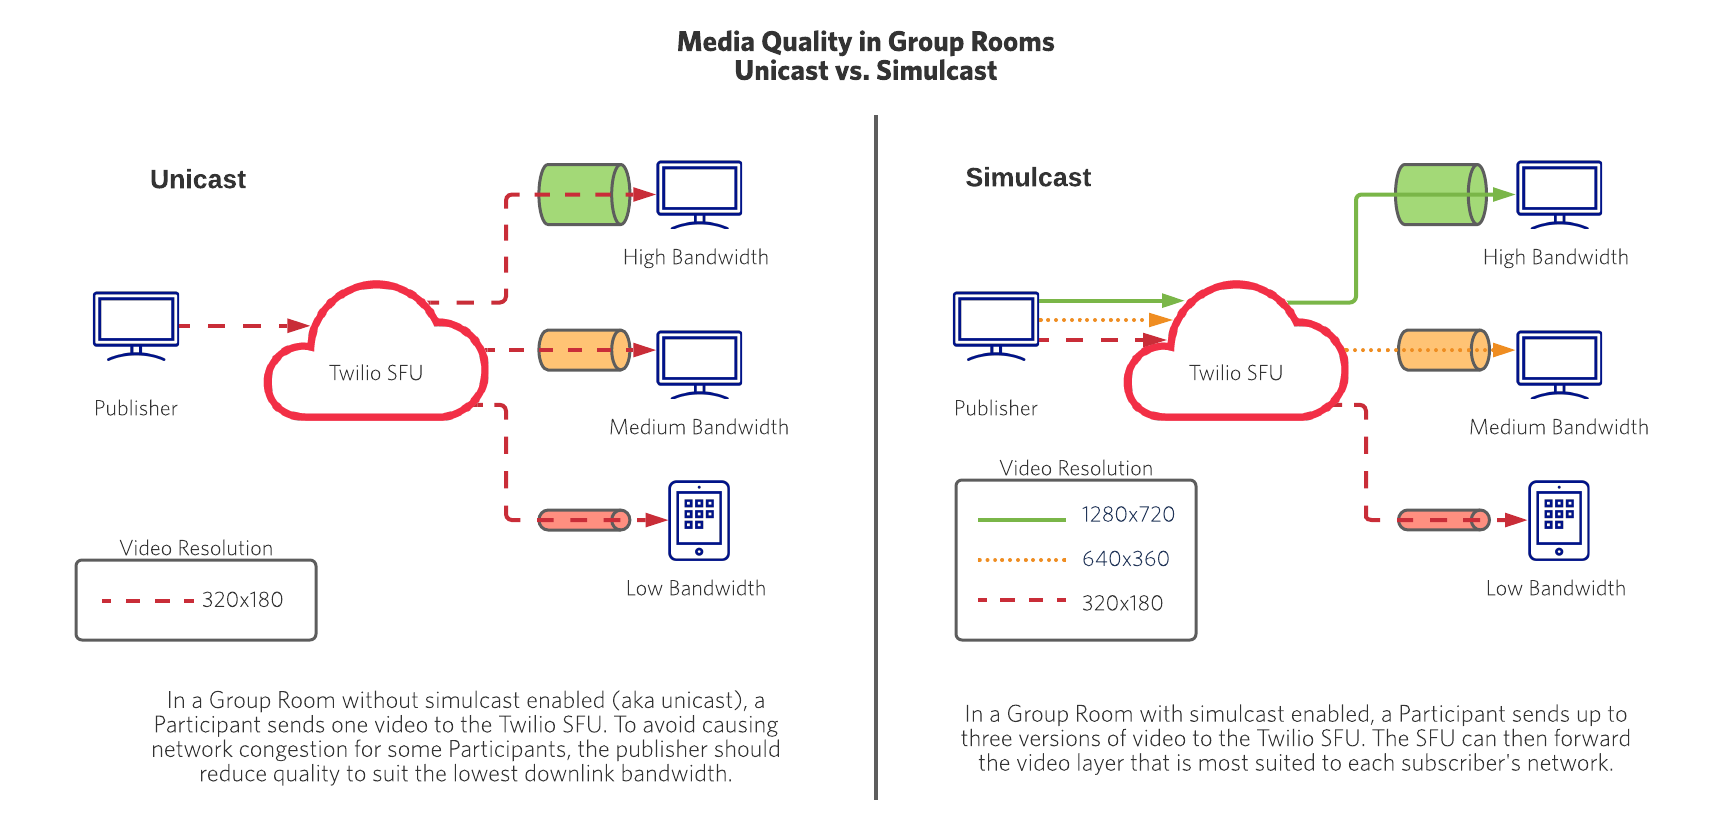 How video is sent in Group Rooms with unicast and simulcast.